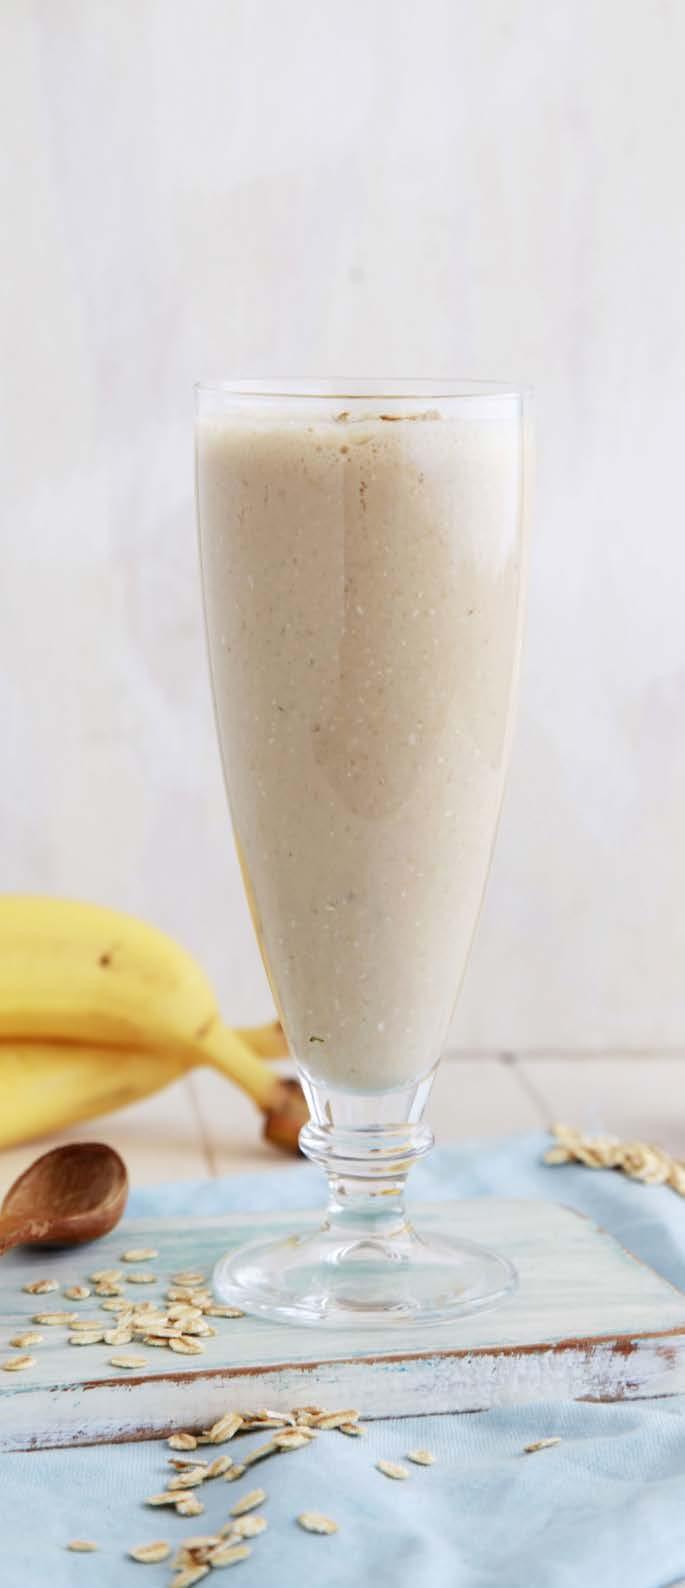 VANILLA SMOOTHIES Banana Oat Buster SERVES 1 CALORIES PER SERVE: 337 (1416KJ) NUTRITIONAL INFO: PROTEIN: 23G FIBRE: 9G TOTAL FAT: 6G SATURATED FAT: 3G CARBOHYDRATES: 45G TOTAL SUGAR: 16G FREE SUGAR: